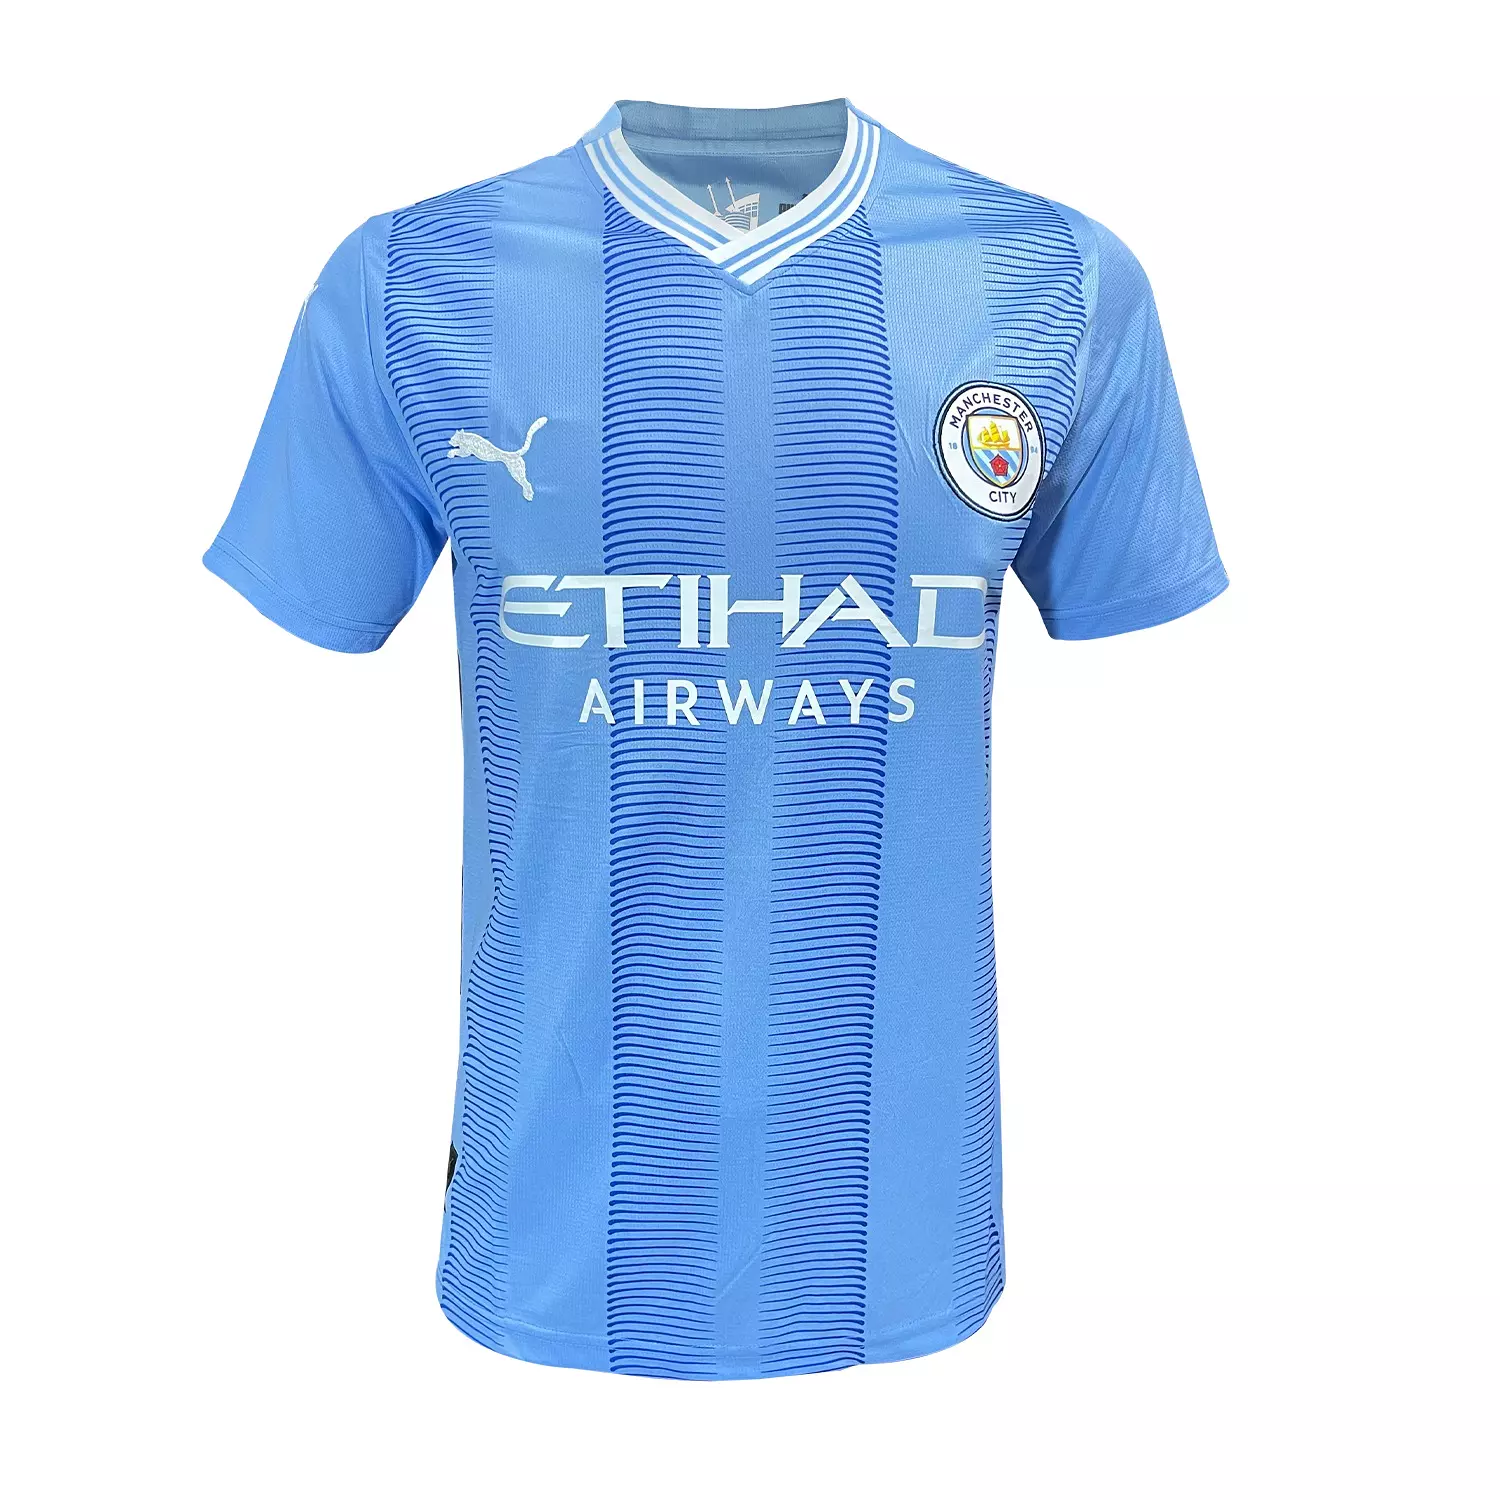 MANCHESTER CITY 23/24 - FANS hover image